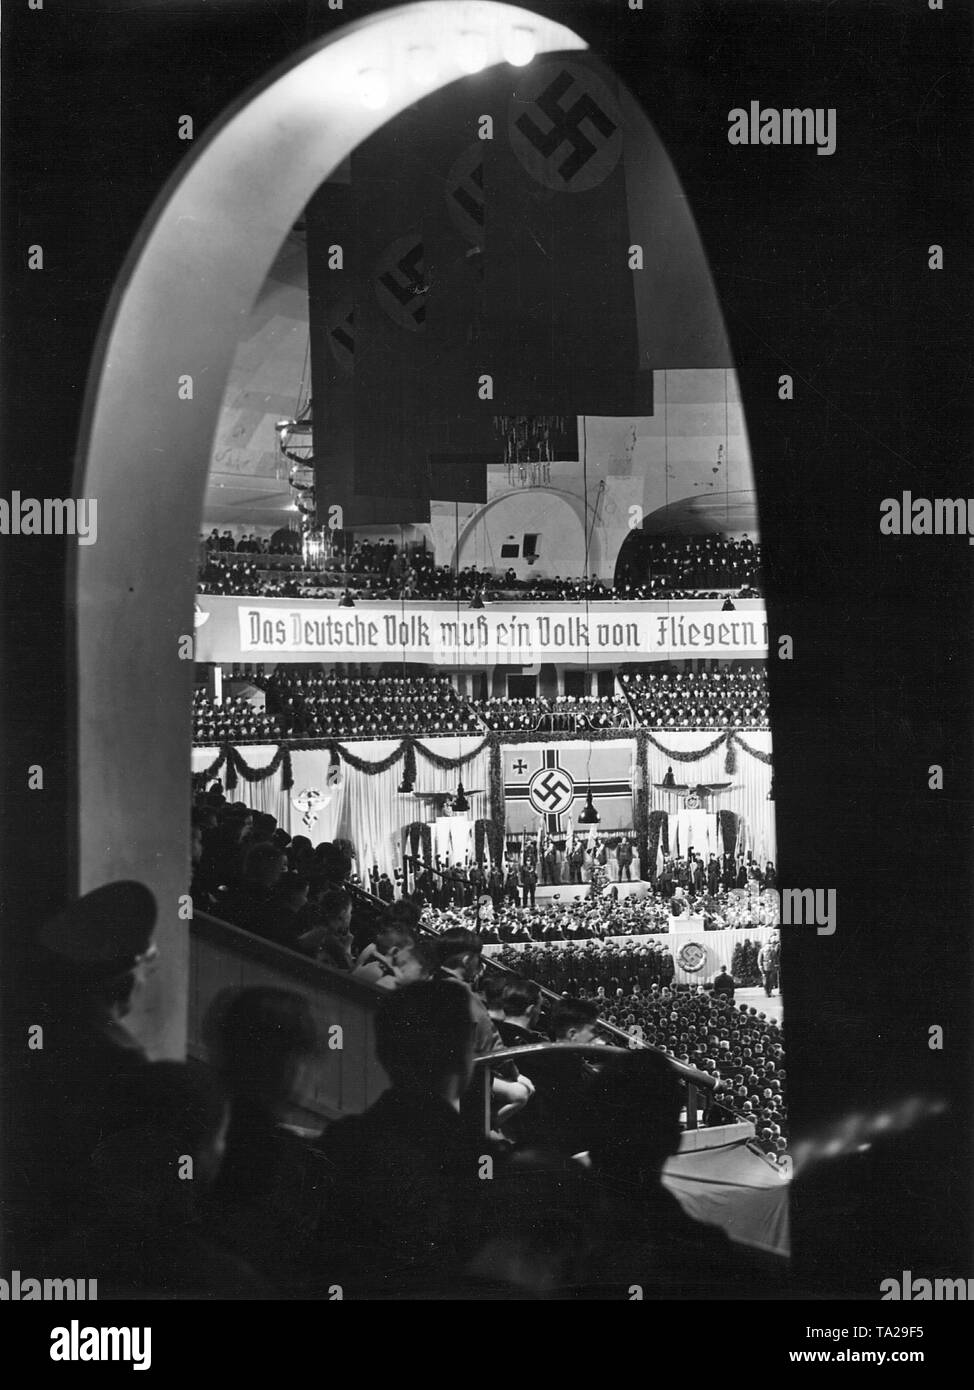 Mass rally of Air Force. Nazi Air Force Corps and Hitler Youth at the opening of the propaganda week of the Luftwaffe. Above the flag-bearer a flag of the Luftwaffe, above the banner reading "Das deutsche Volk muss ein Volk von Fliegern" (The German nation must become a nation of fliers). Stock Photo